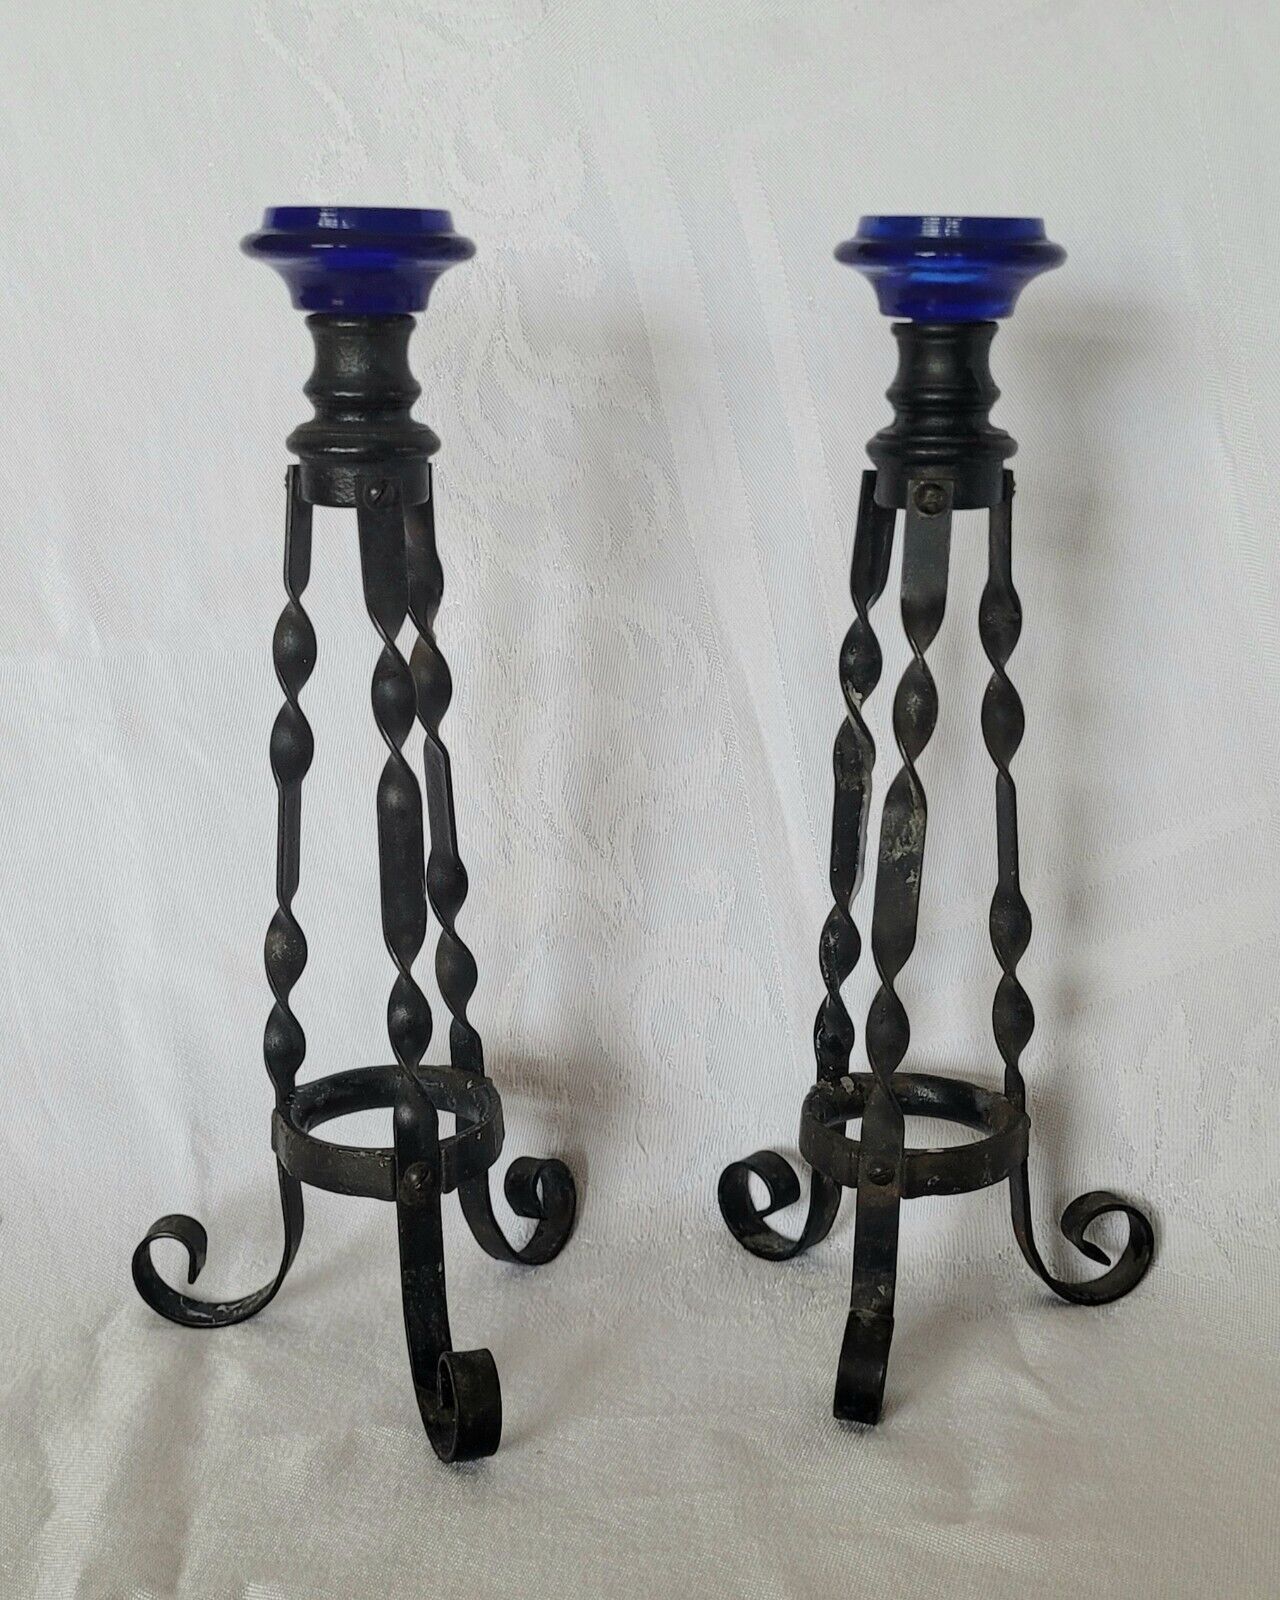 Antique Pair of Spanish Revival Twisted Iron & Cobalt Glass Candlesticks